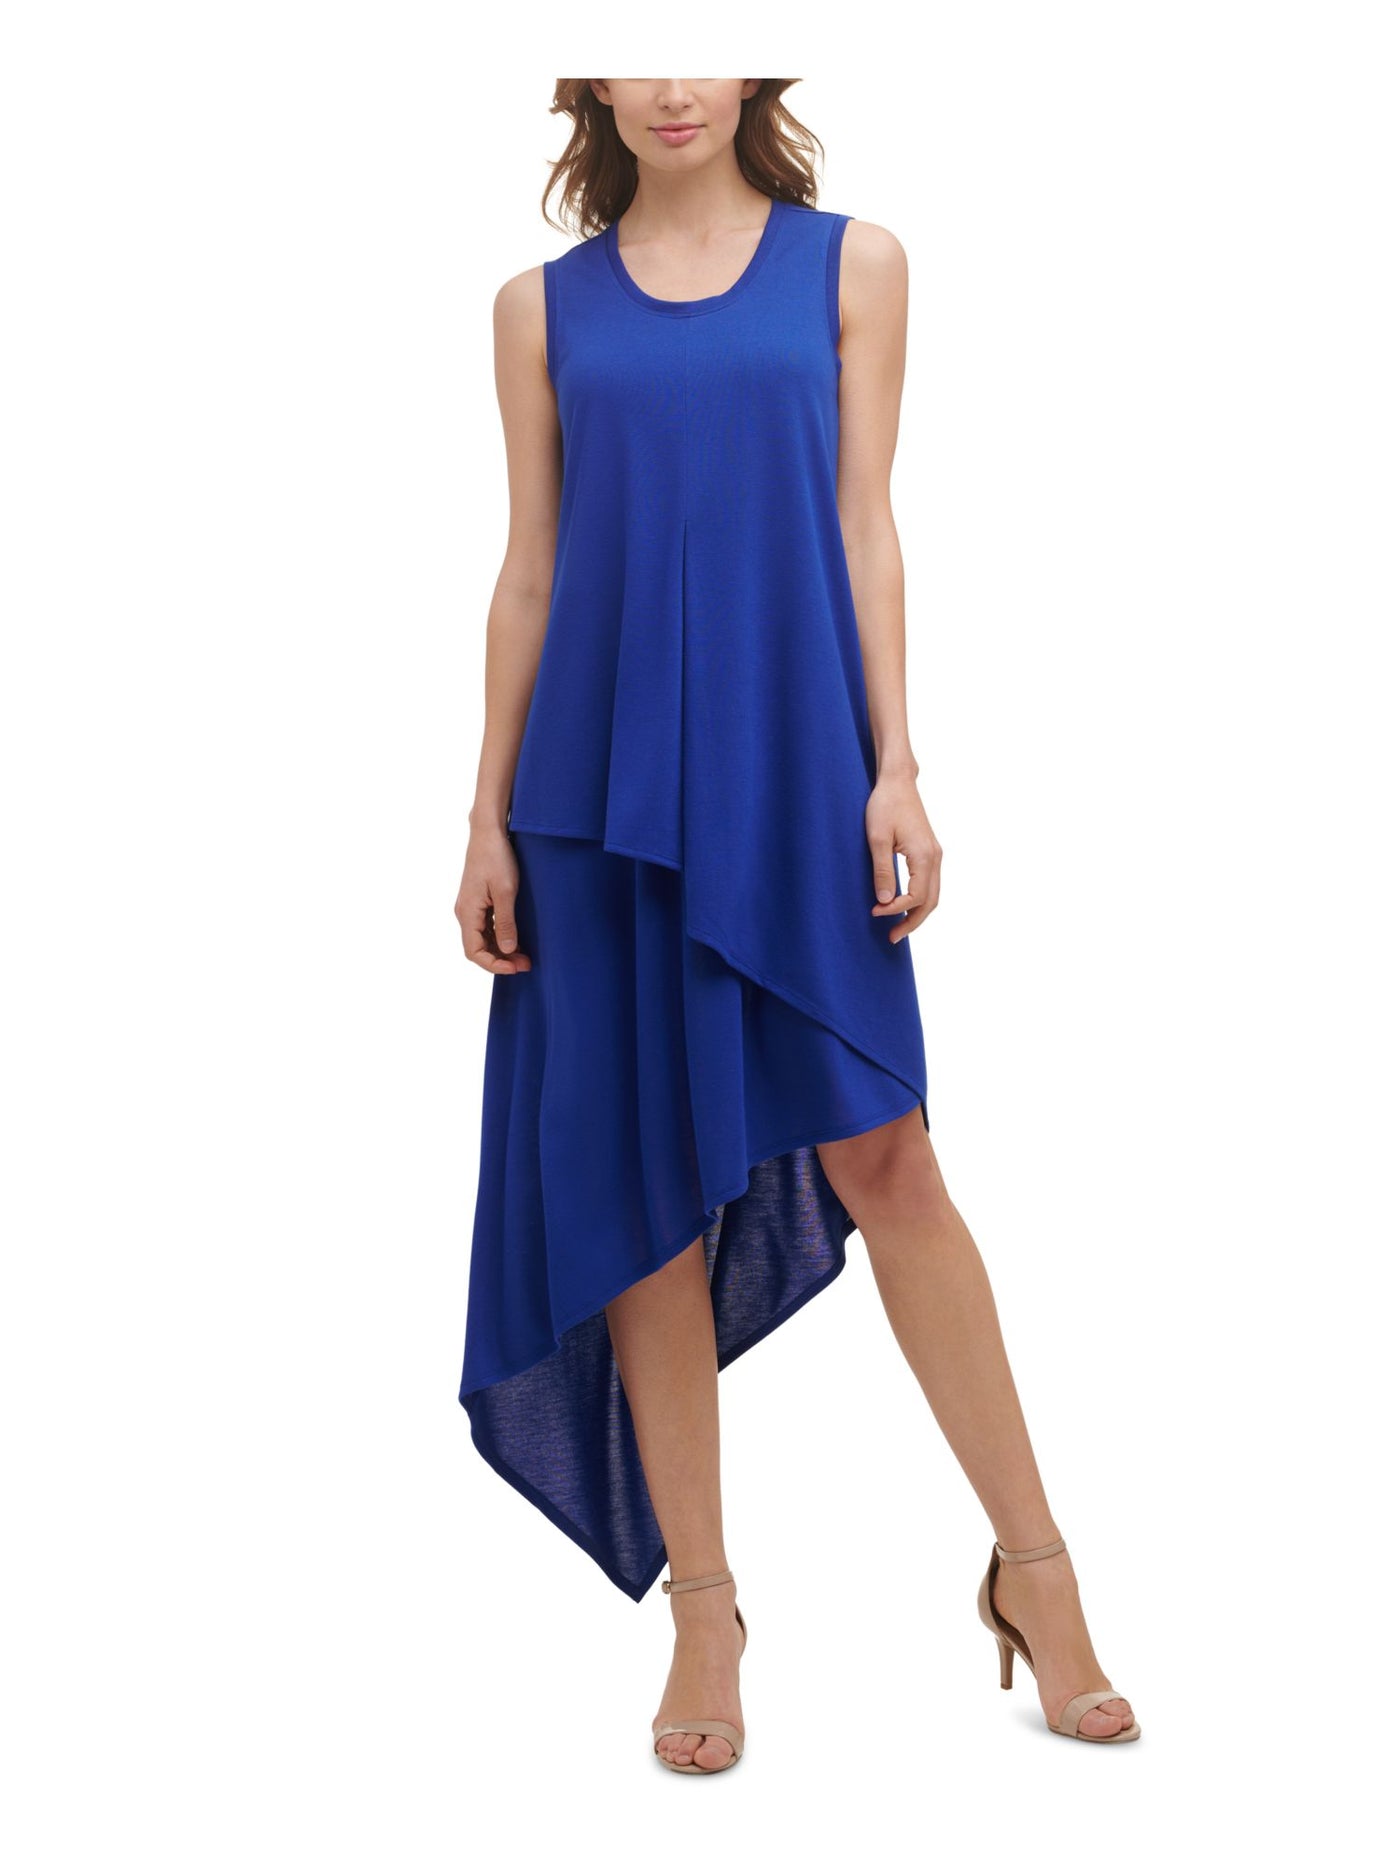 KENSIE Womens Blue Jersey Pleated Pullover Styling Unlined Sleeveless Jewel Neck Maxi Evening Hi-Lo Dress Juniors S